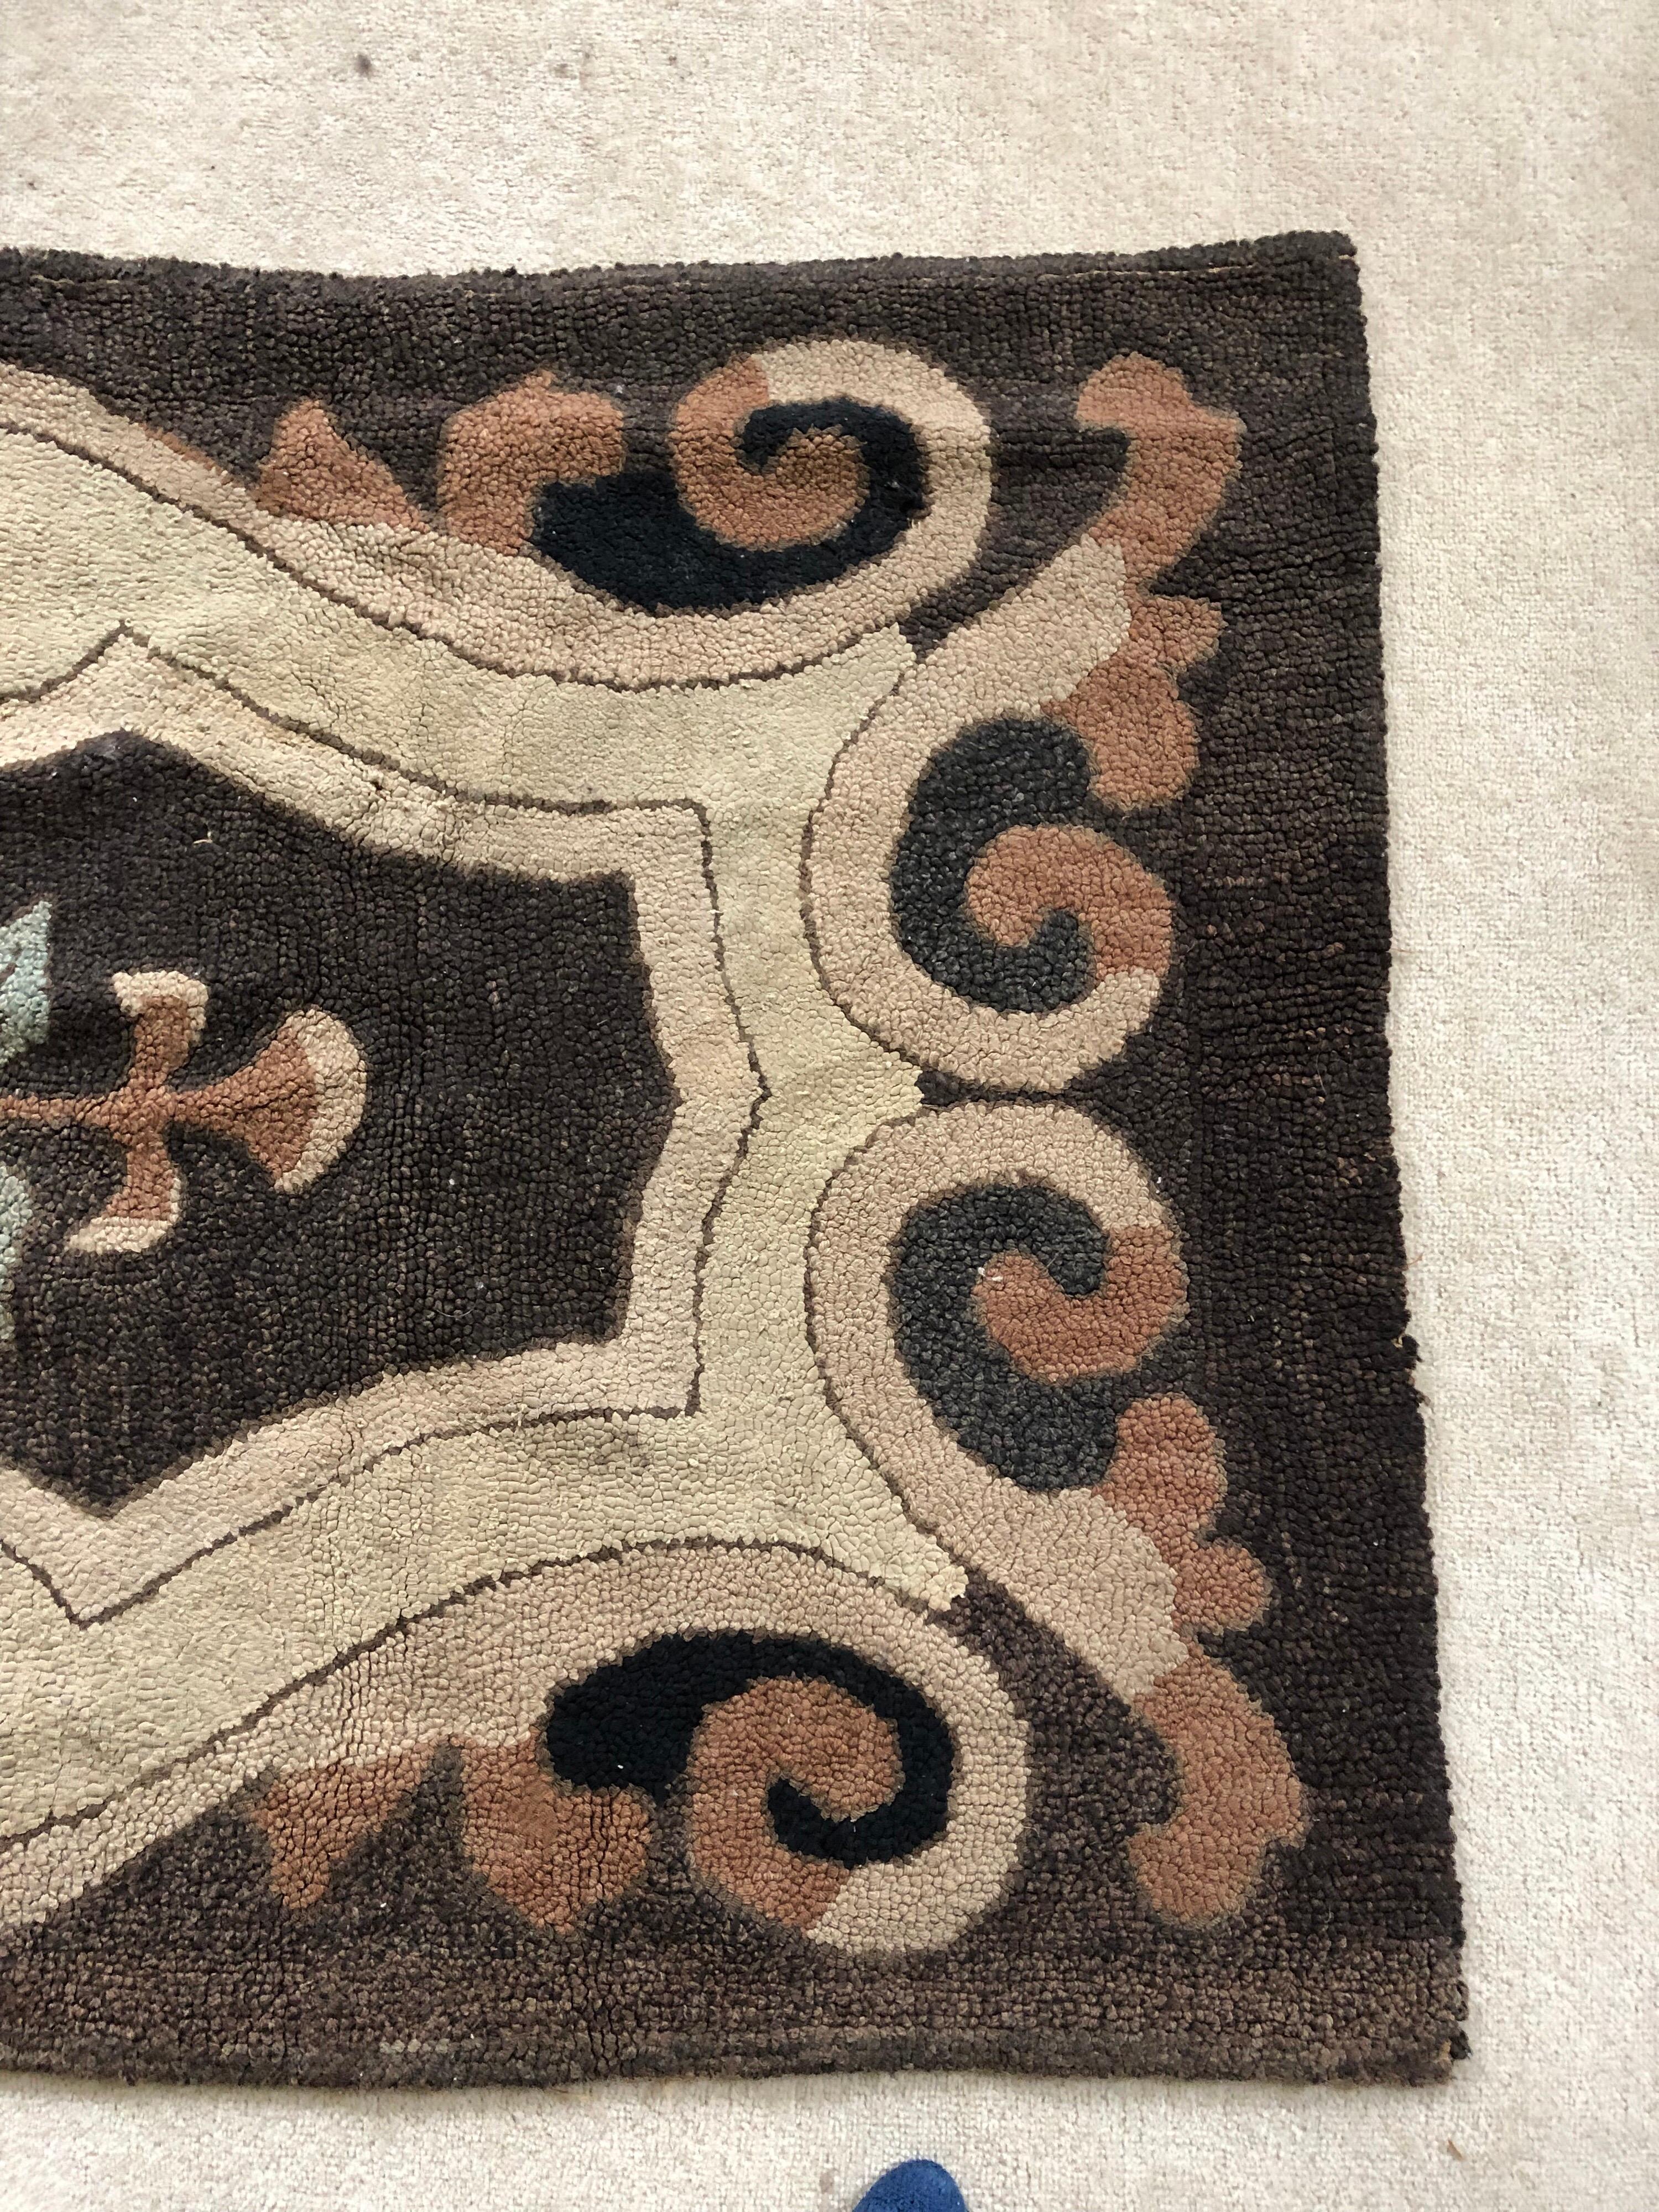 Hand-Woven 19th Century American Hooked Rug